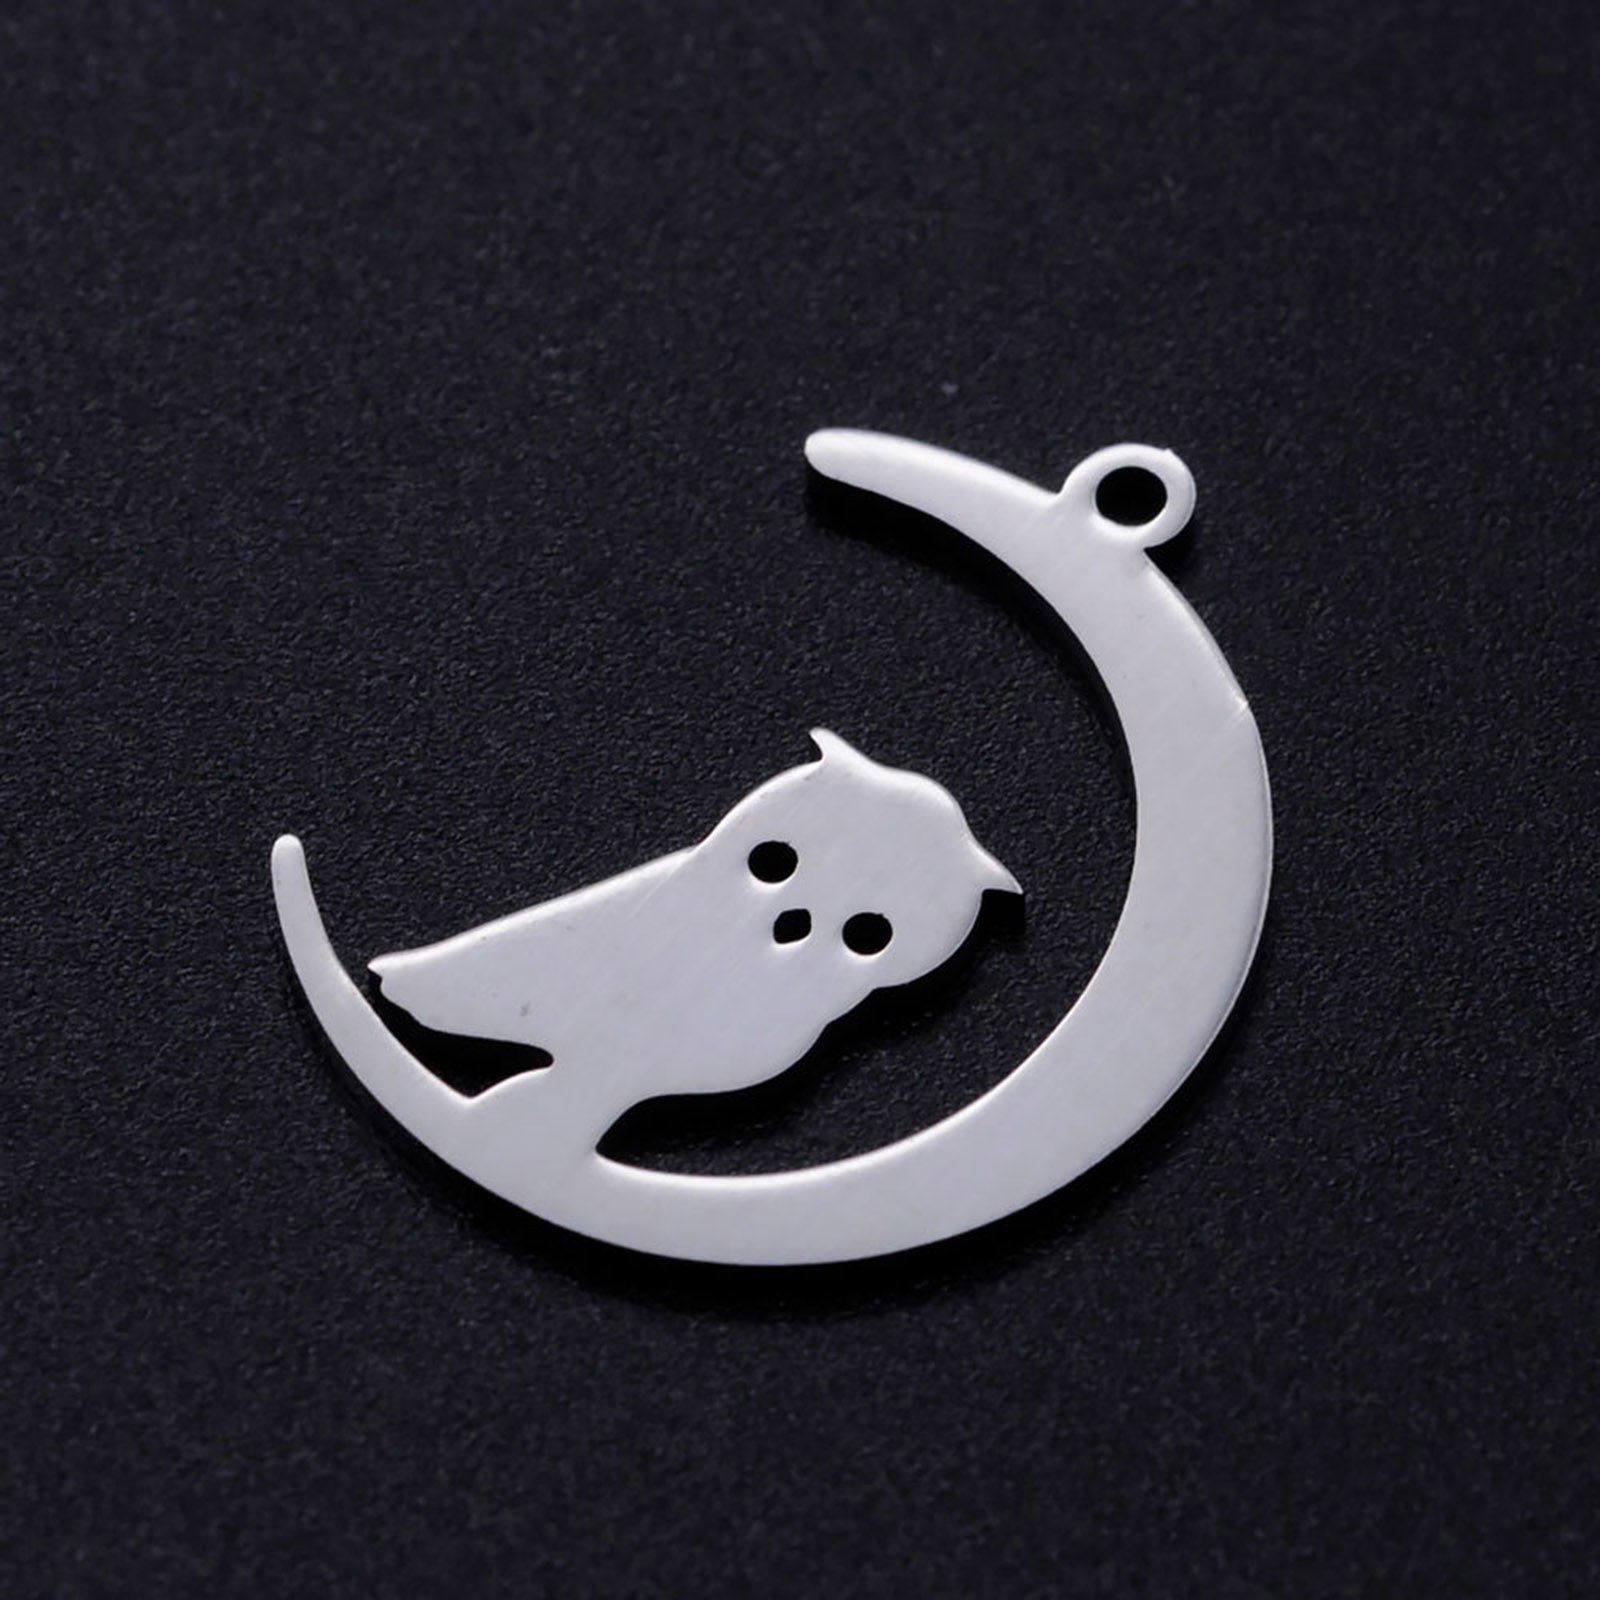 Stainless Steel Halloween Charms Multicolor Half Moon Owl 23.5mm x 17.5mm, 5 PCs の画像